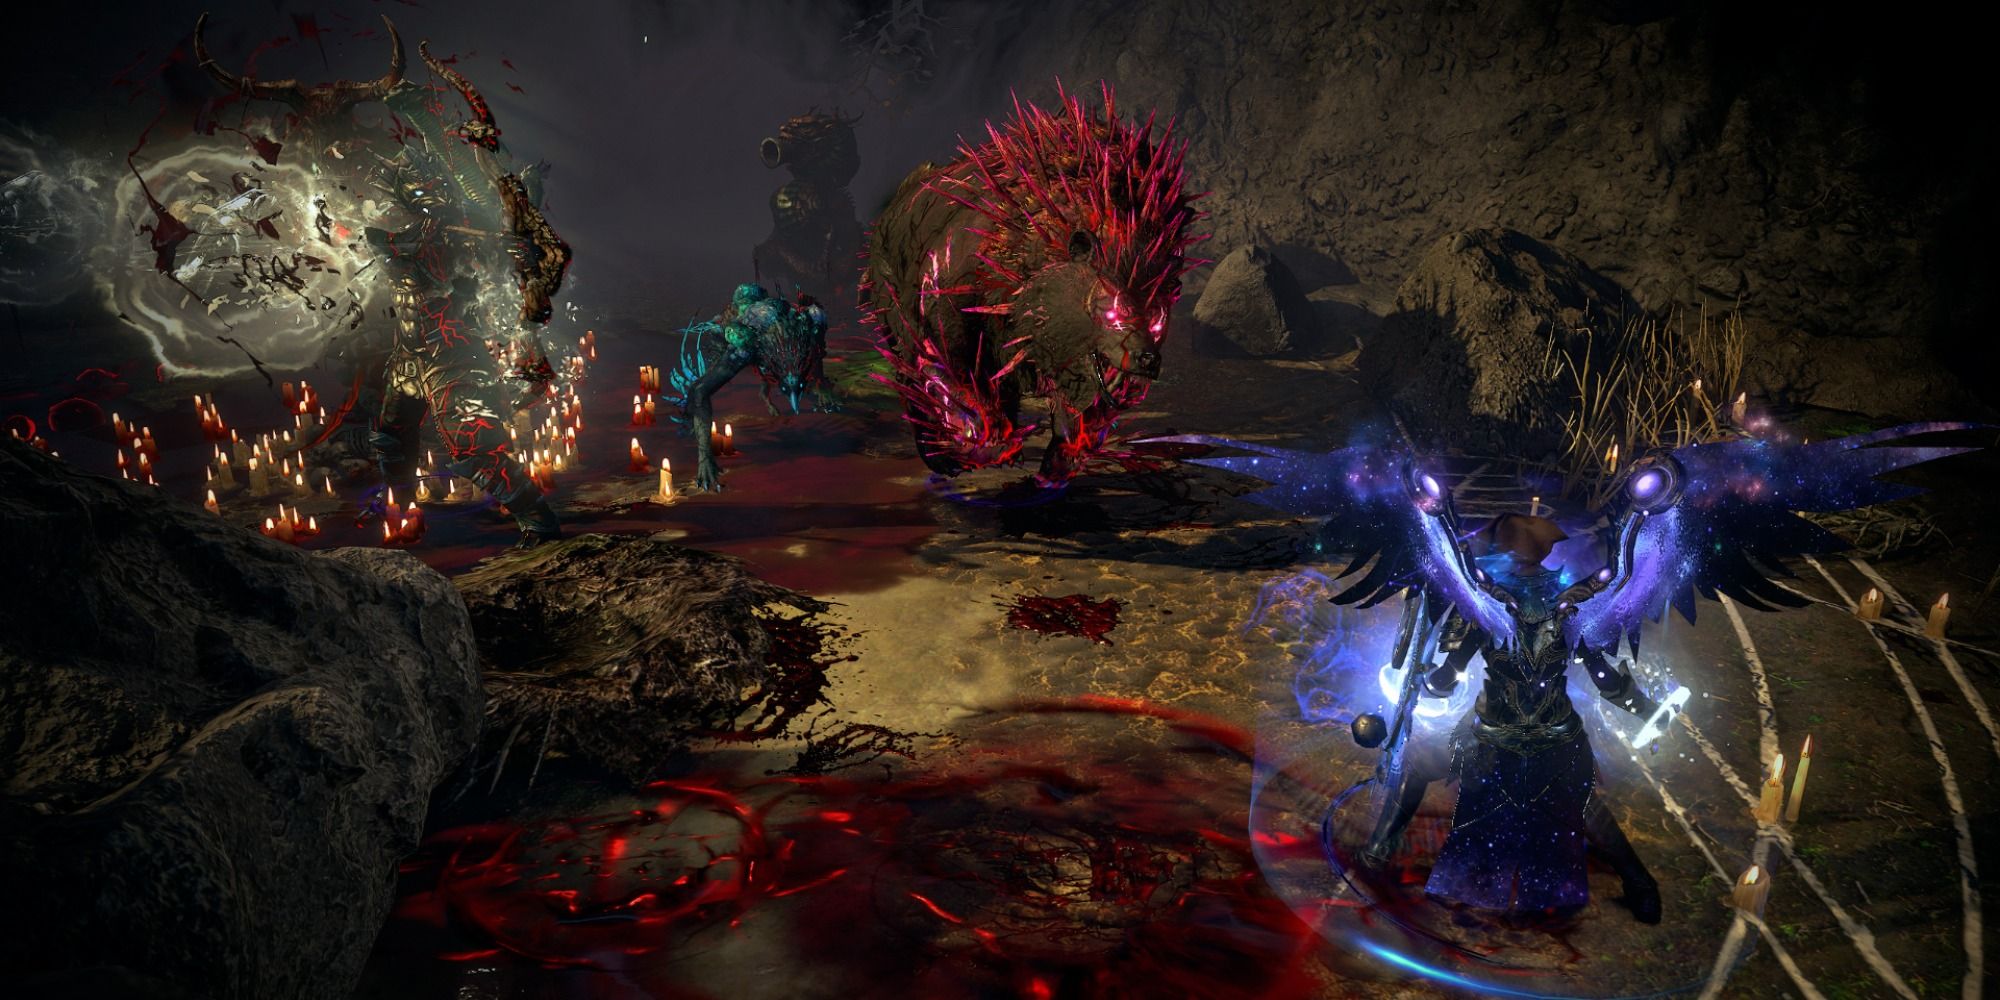 Path of Exile player character with glowing blue wings facing a glowing red beast